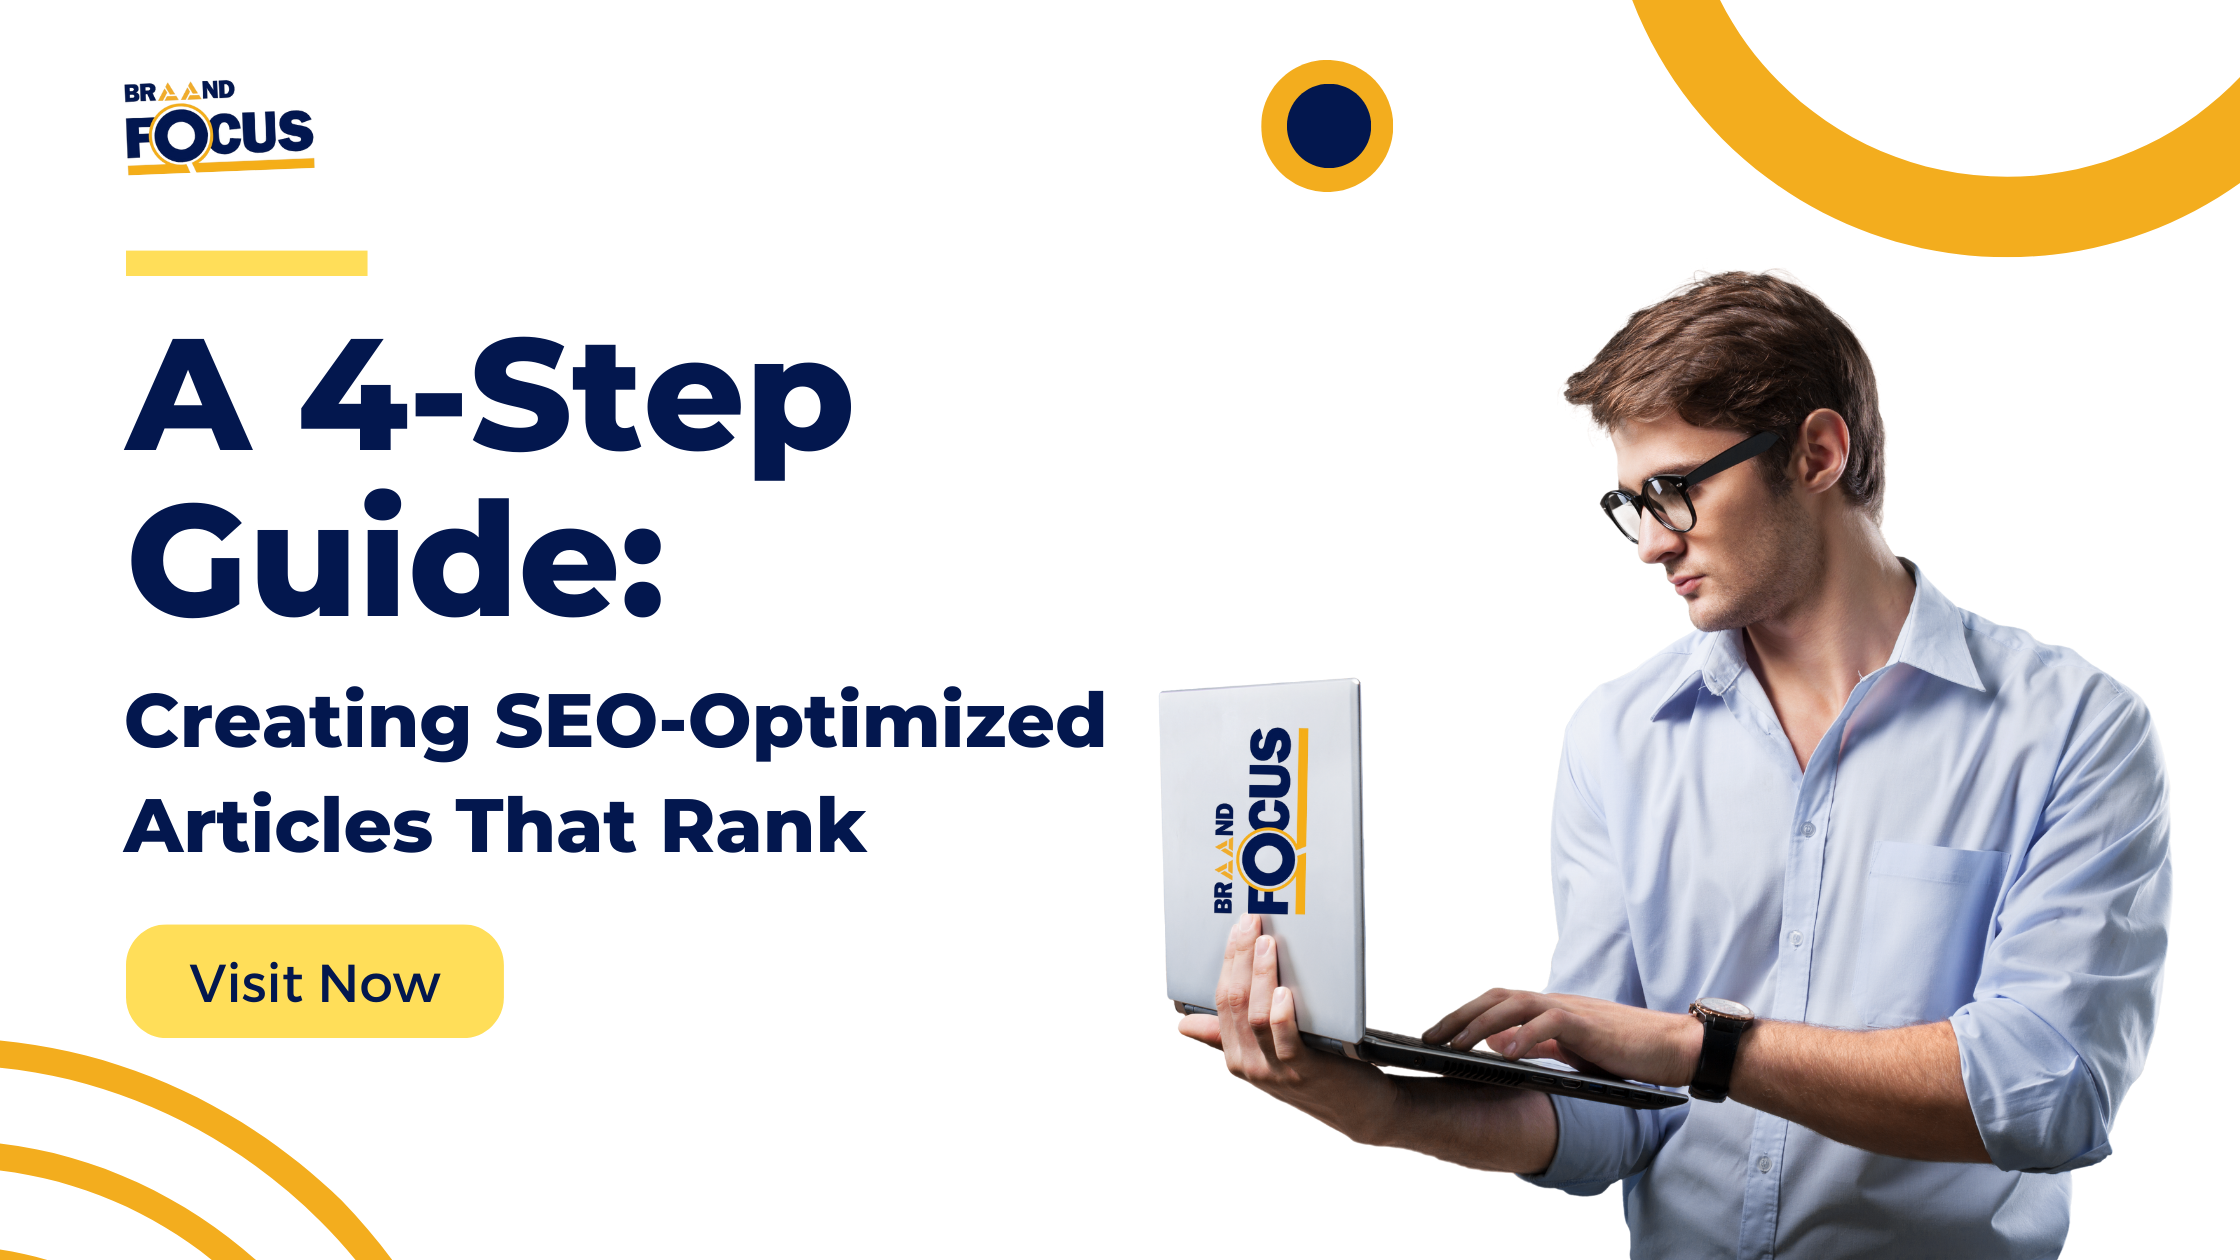 A man using a laptop to follow a 4-step guide for creating SEO-optimized articles that rank.